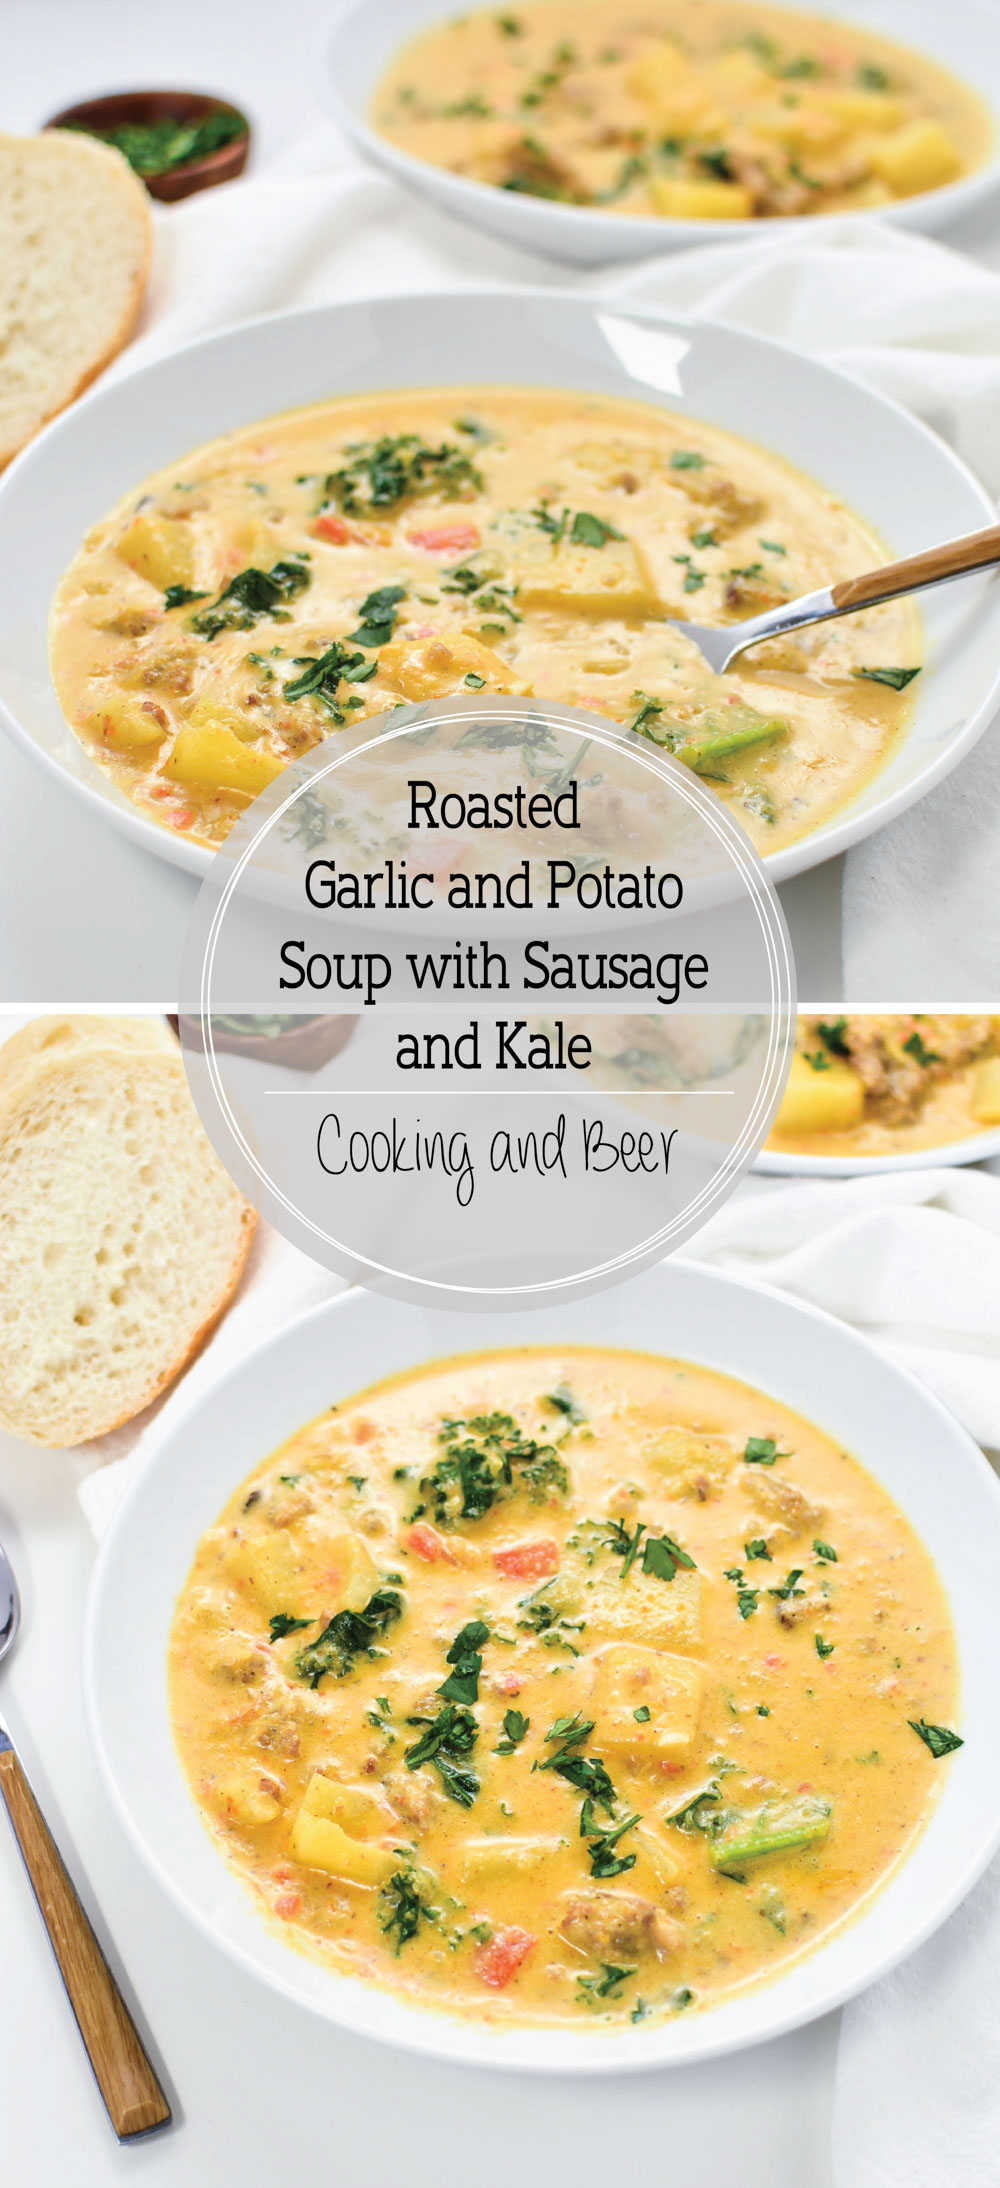 Step up your lunch game with this easy and nutritious roasted garlic and potato soup with sausage and kale!